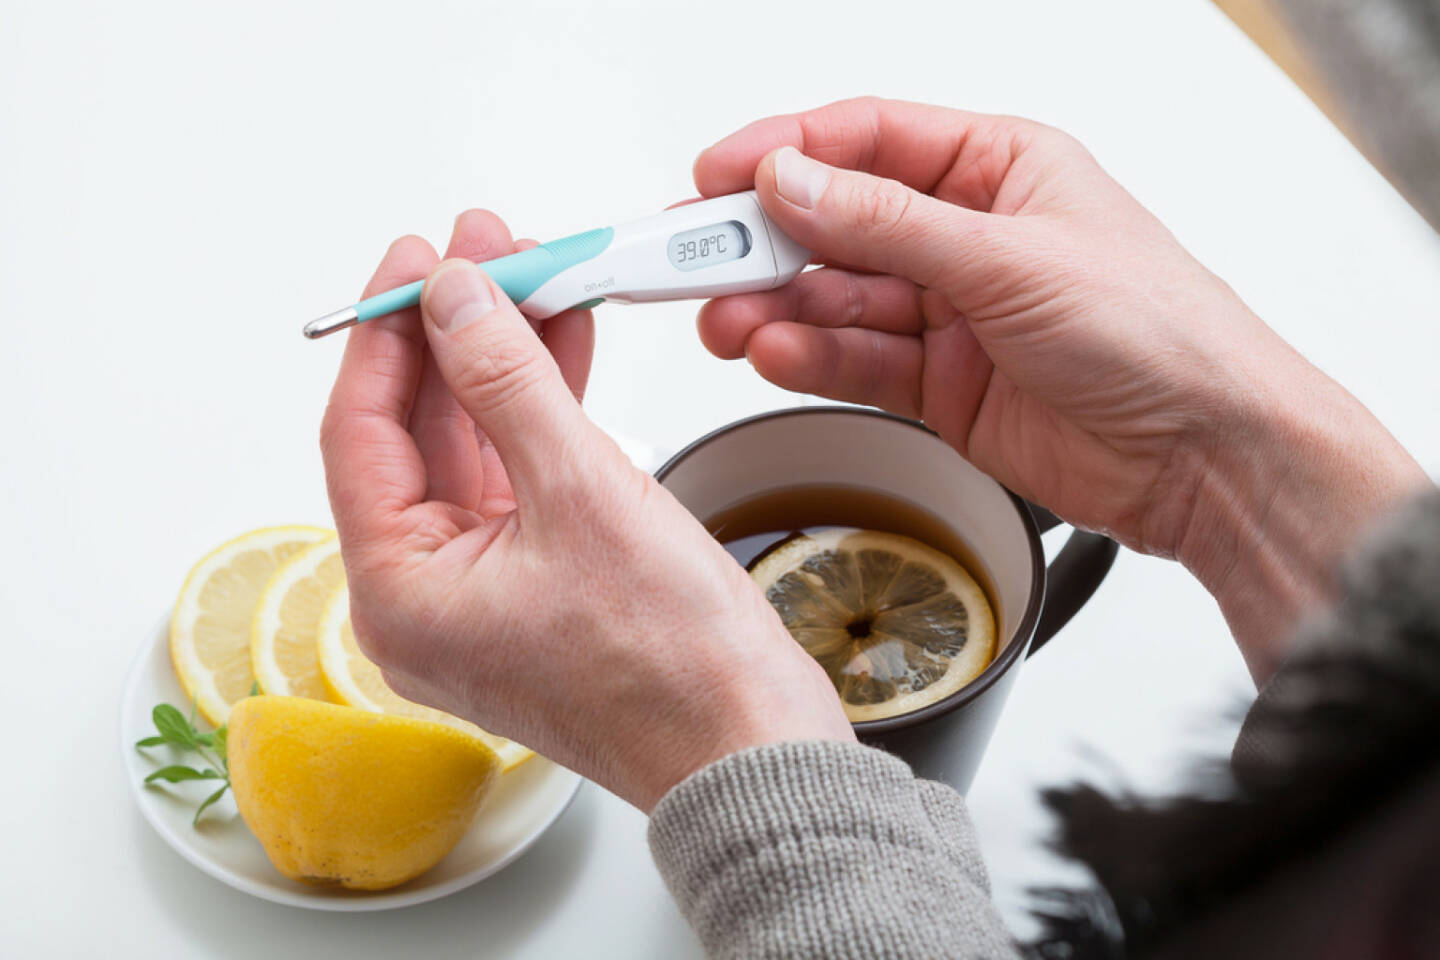 schwach, krank, Fieber, Grippe, Thermometer, Tee, Zitrone, http://www.shutterstock.com/de/pic-160644377/stock-photo-sick-person-who-is-looking-at-thermometer-and-drinking-hot-tea-with-lemon.html 